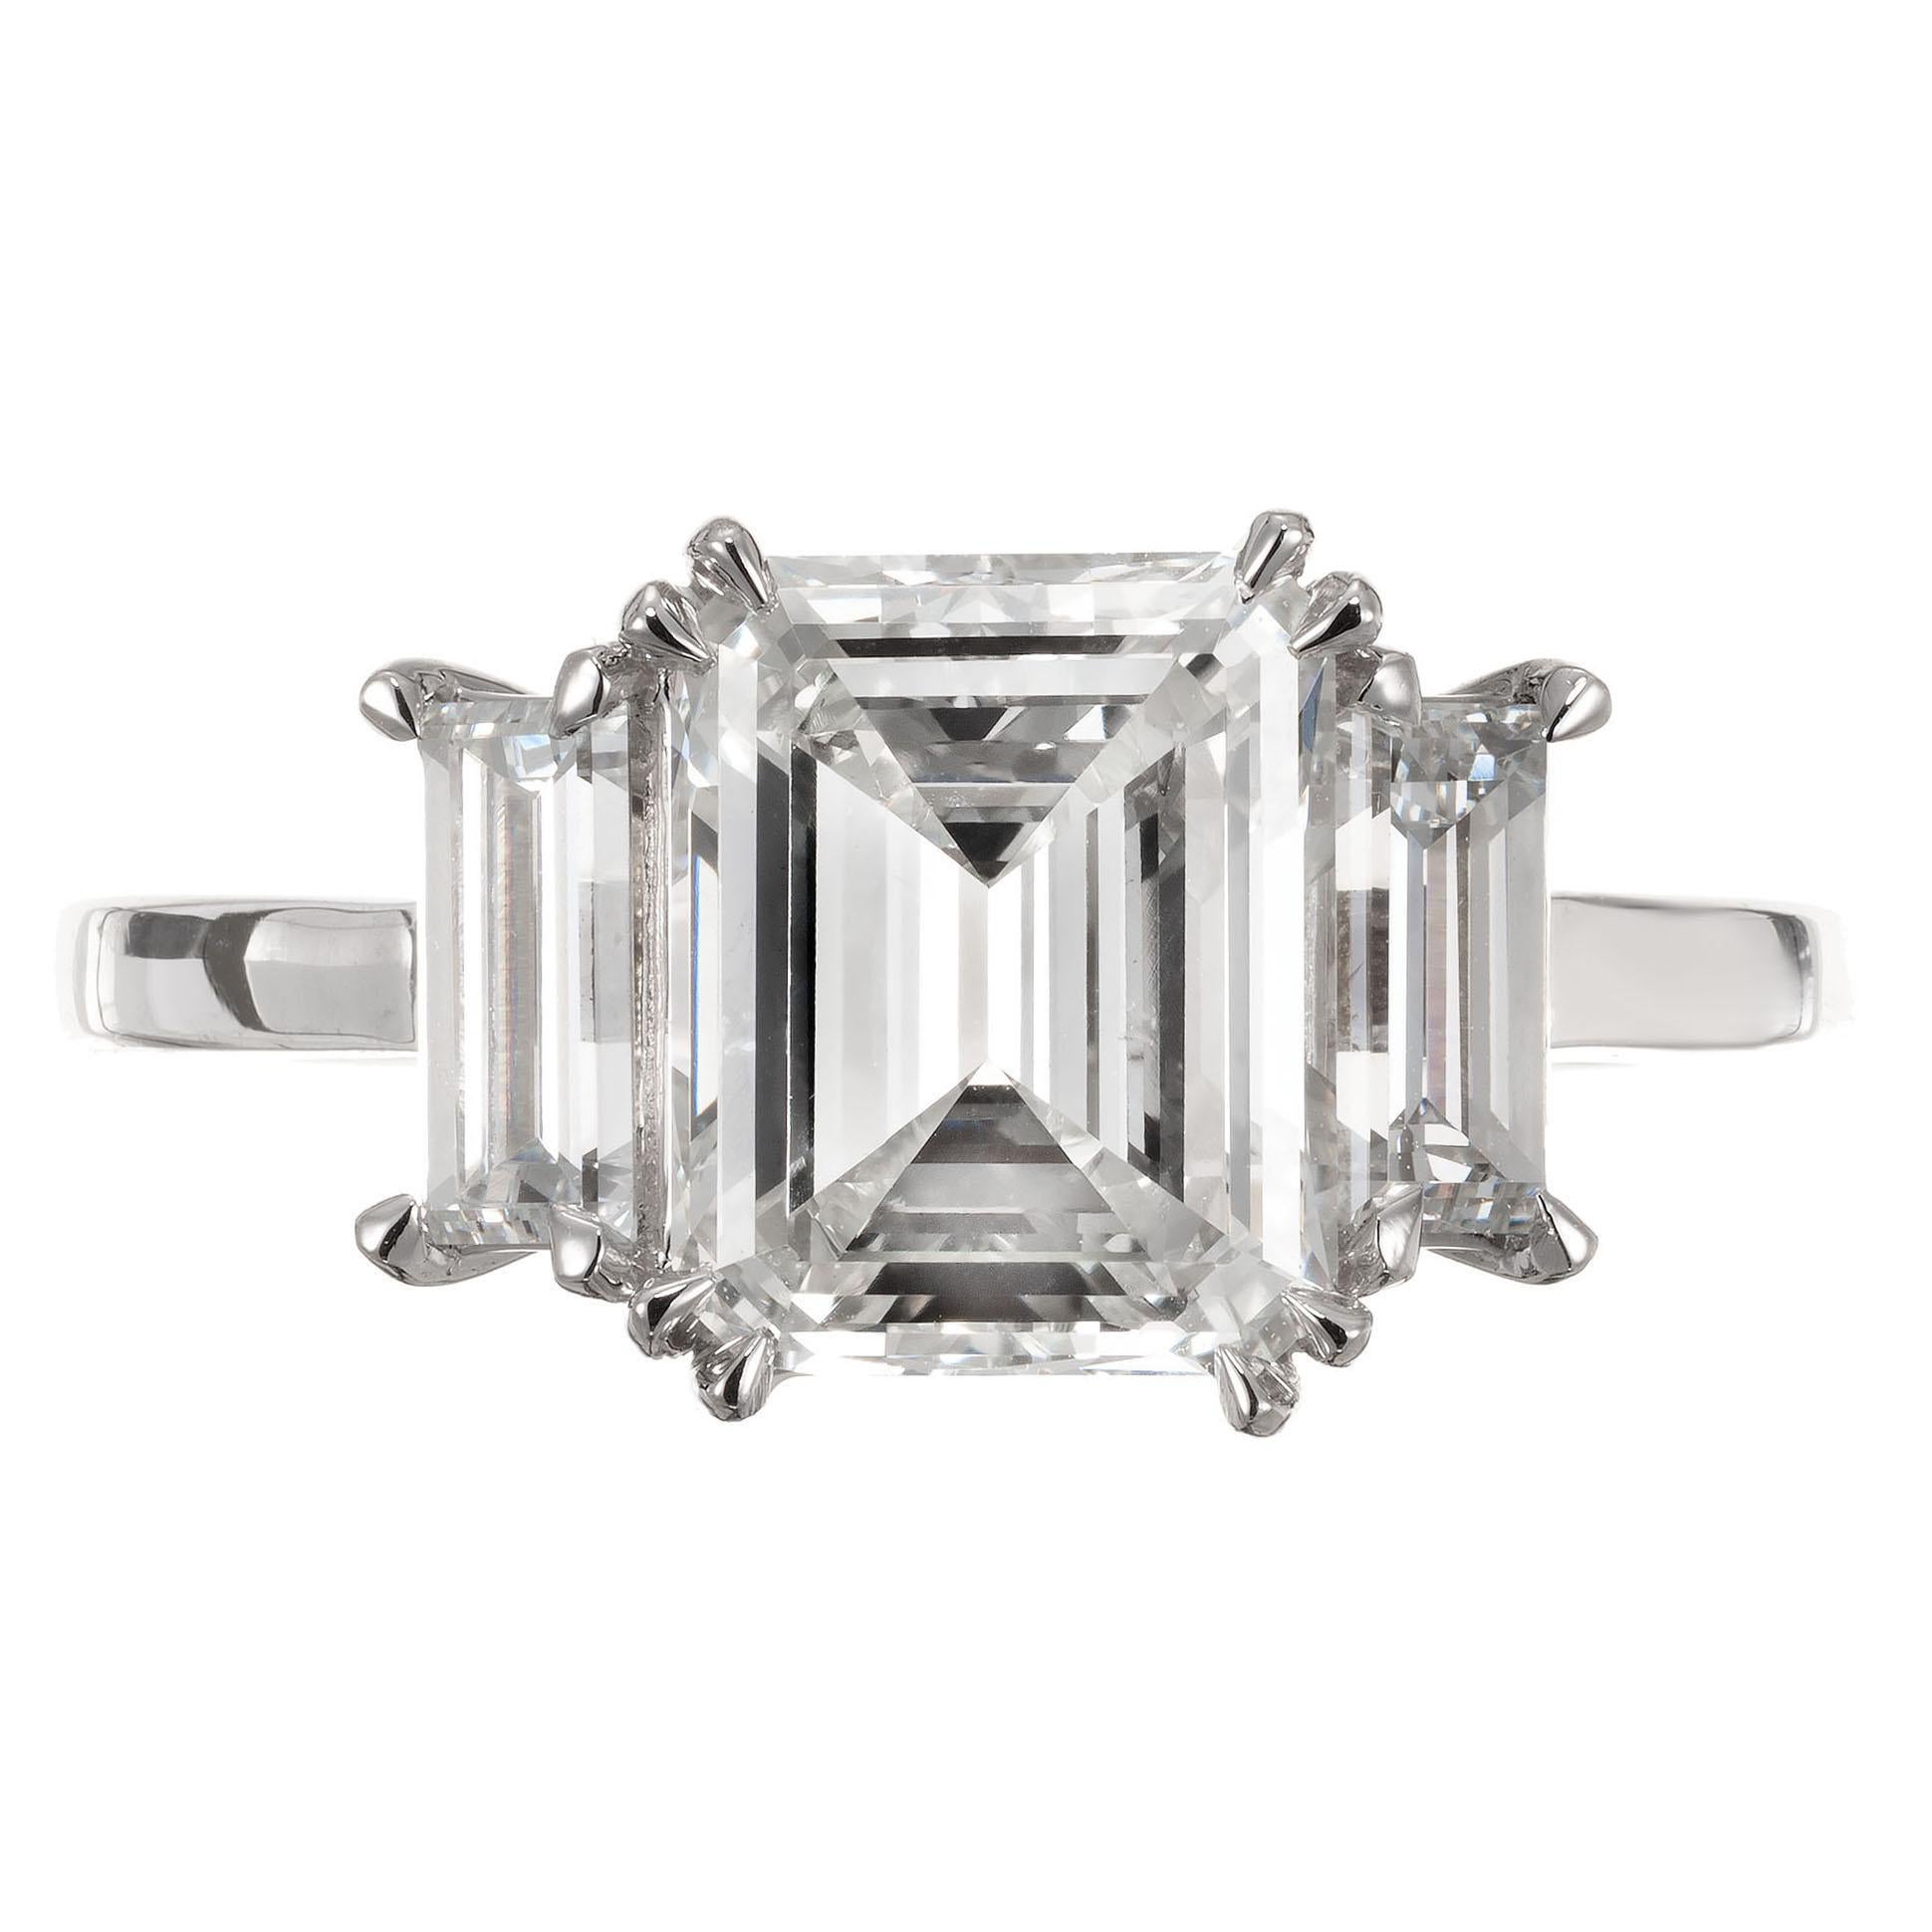 Peter Suchy Art Deco design handmade platinum diamond engagement ring. GIA certified emerald cut center stone with two 1920's straight baguette side diamonds in a handmade Art Deco inspired three-stone setting, created in the Peter Suchy Workshop.